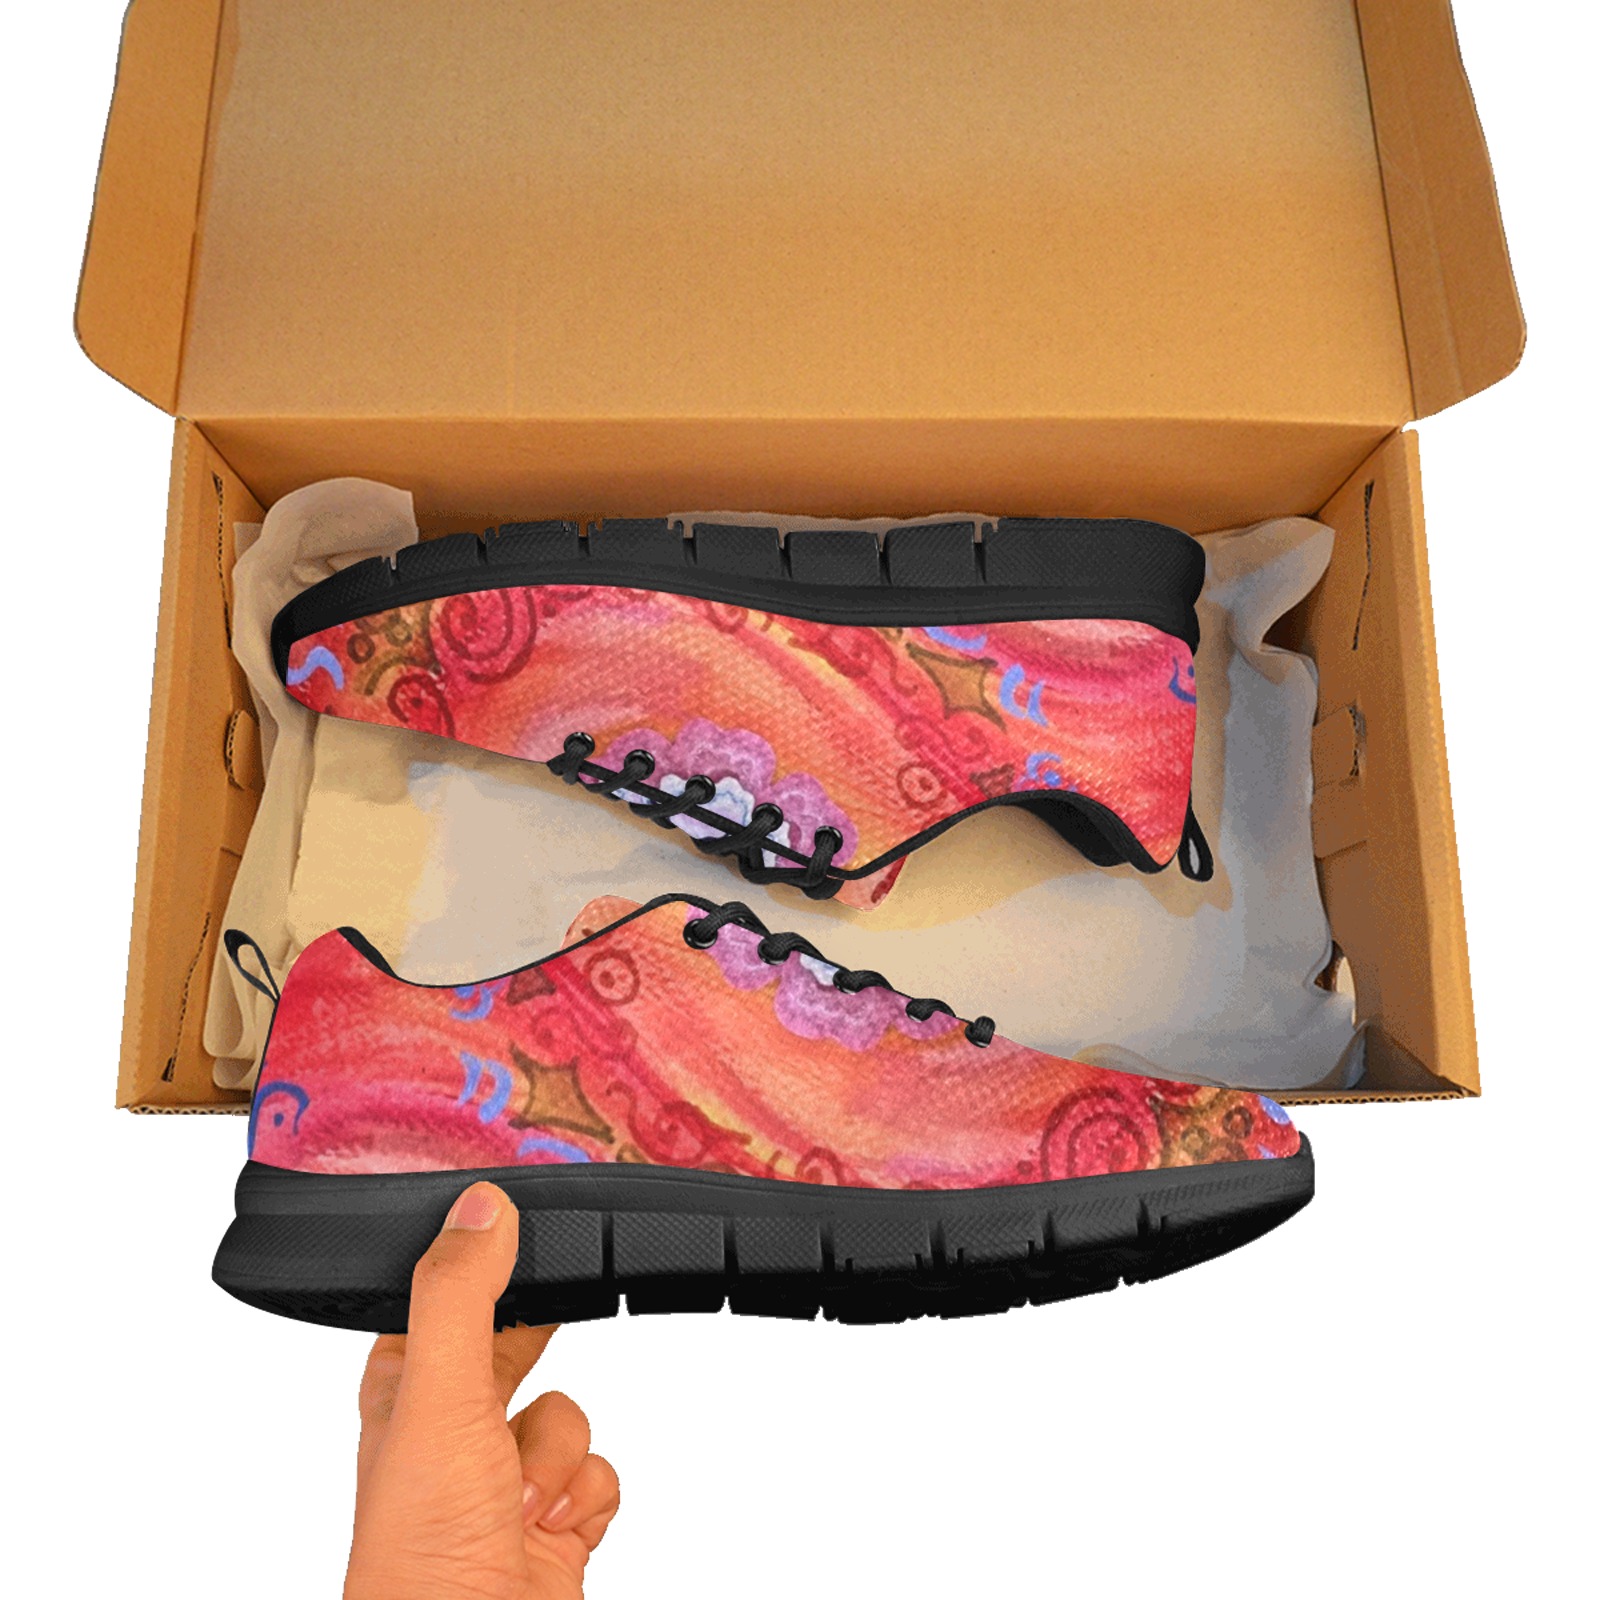 flame flora Women's Breathable Running Shoes (Model 055)